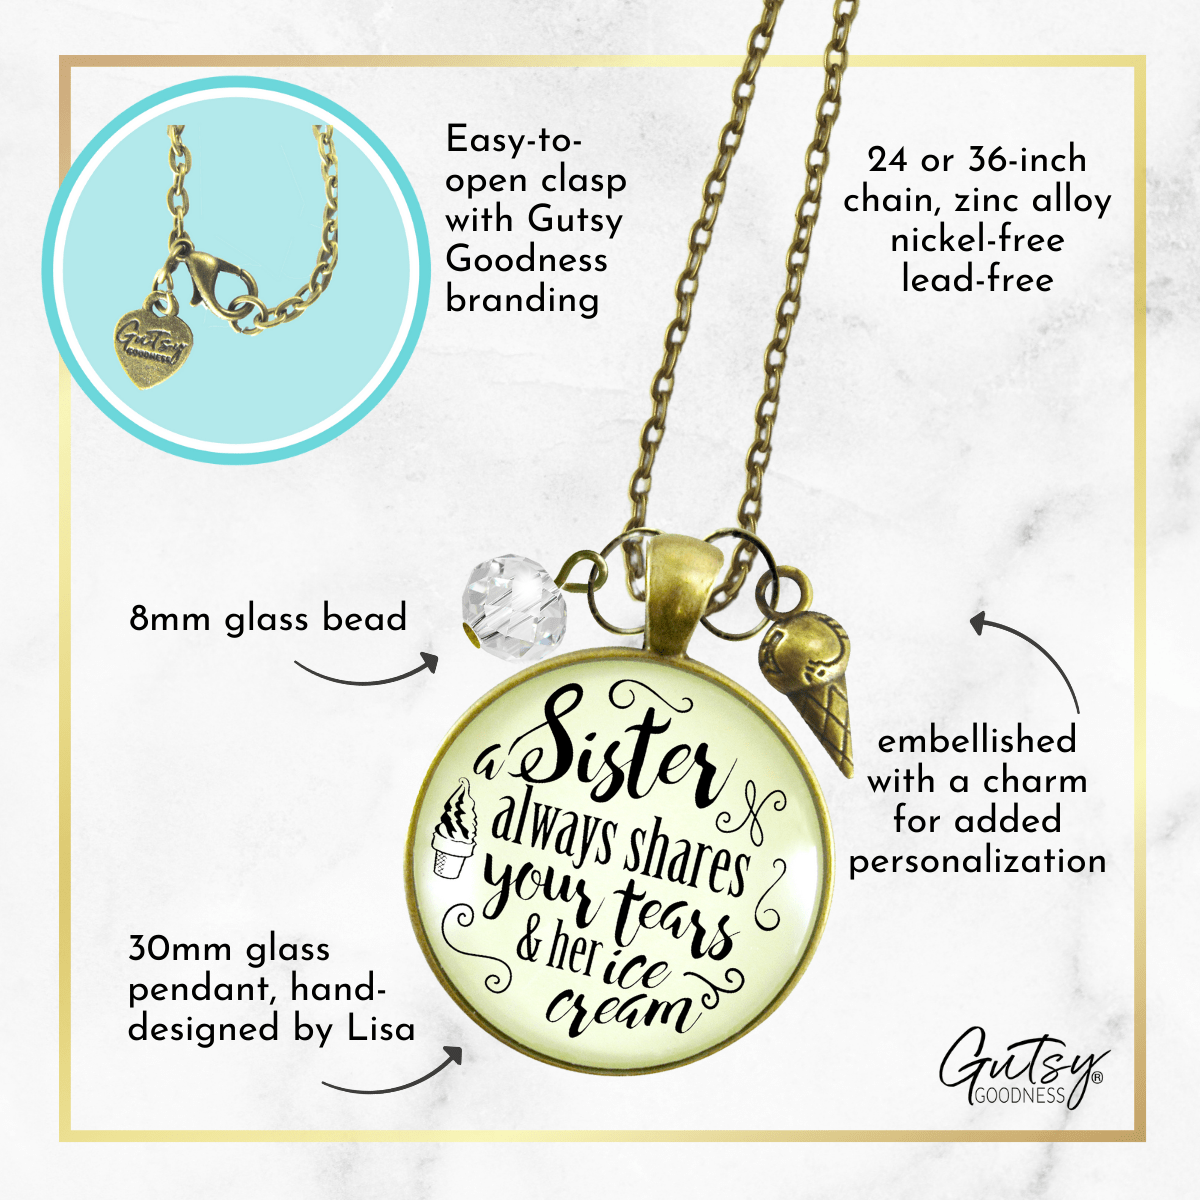 Gutsy Goodness Sister Shares Your Tears Ice Cream Necklace BFF Quote Jewelry Gift - Gutsy Goodness Handmade Jewelry;Sister Shares Your Tears Ice Cream Necklace Bff Quote Jewelry Gift - Gutsy Goodness Handmade Jewelry Gifts